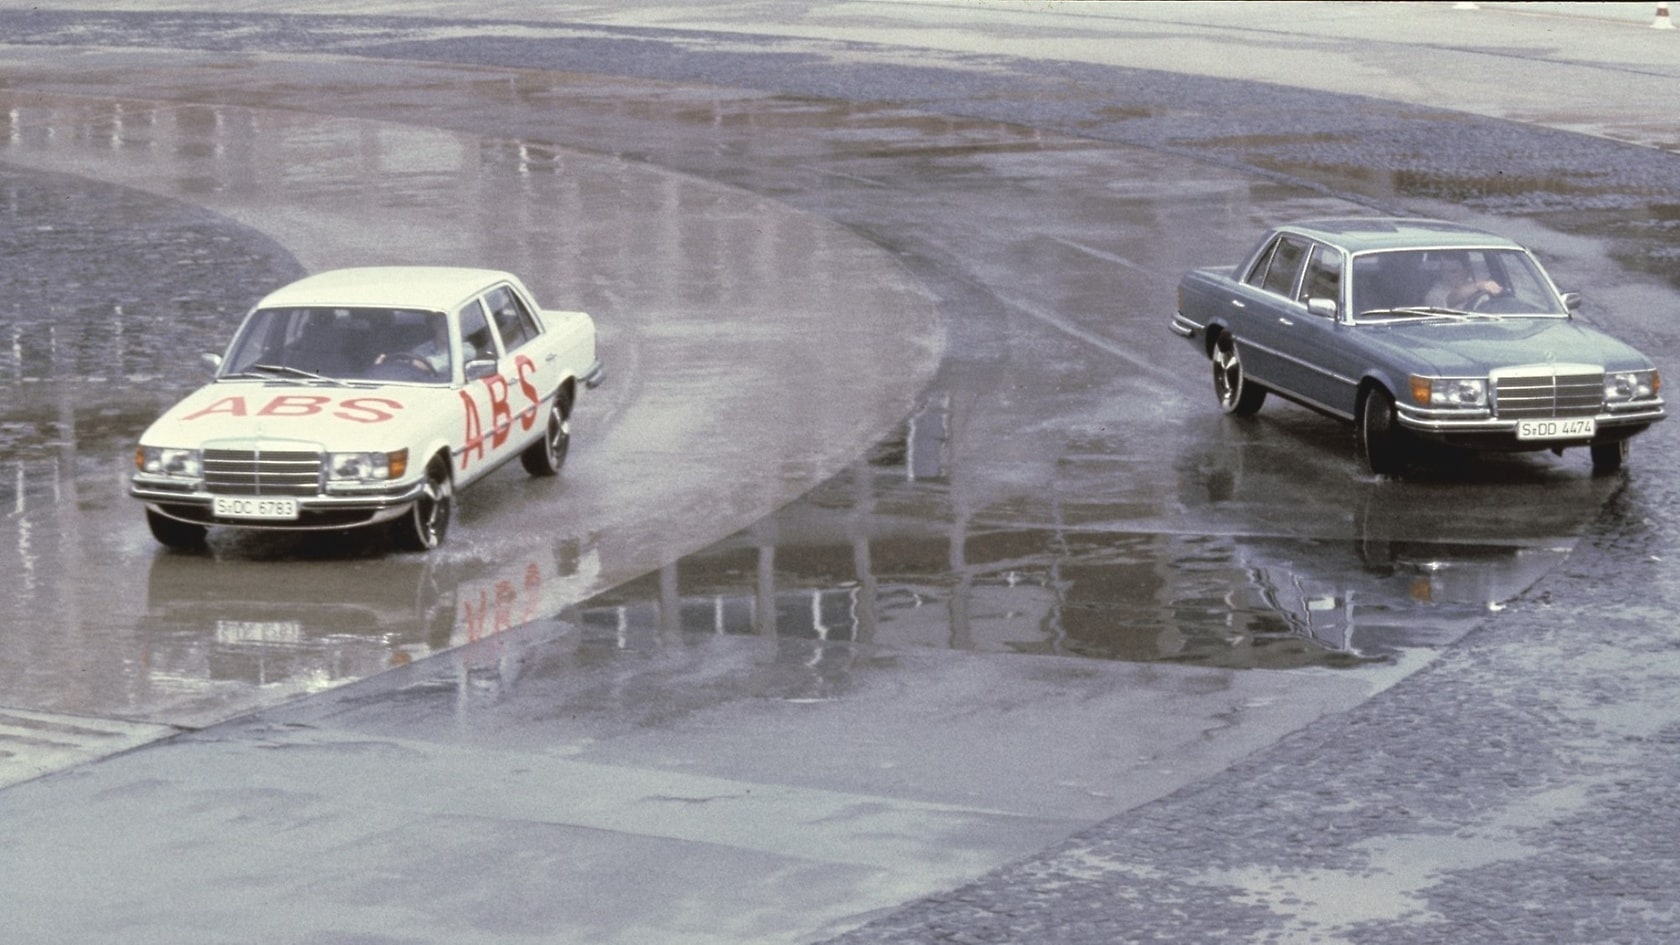 Demonstration of the standard version of the anti-lock braking system (ABS) on the test track at the Mercedes-Benz Stuttgart-Untertürkheim plant with Mercedes-Benz S-Class saloons (model series 116), 1978.